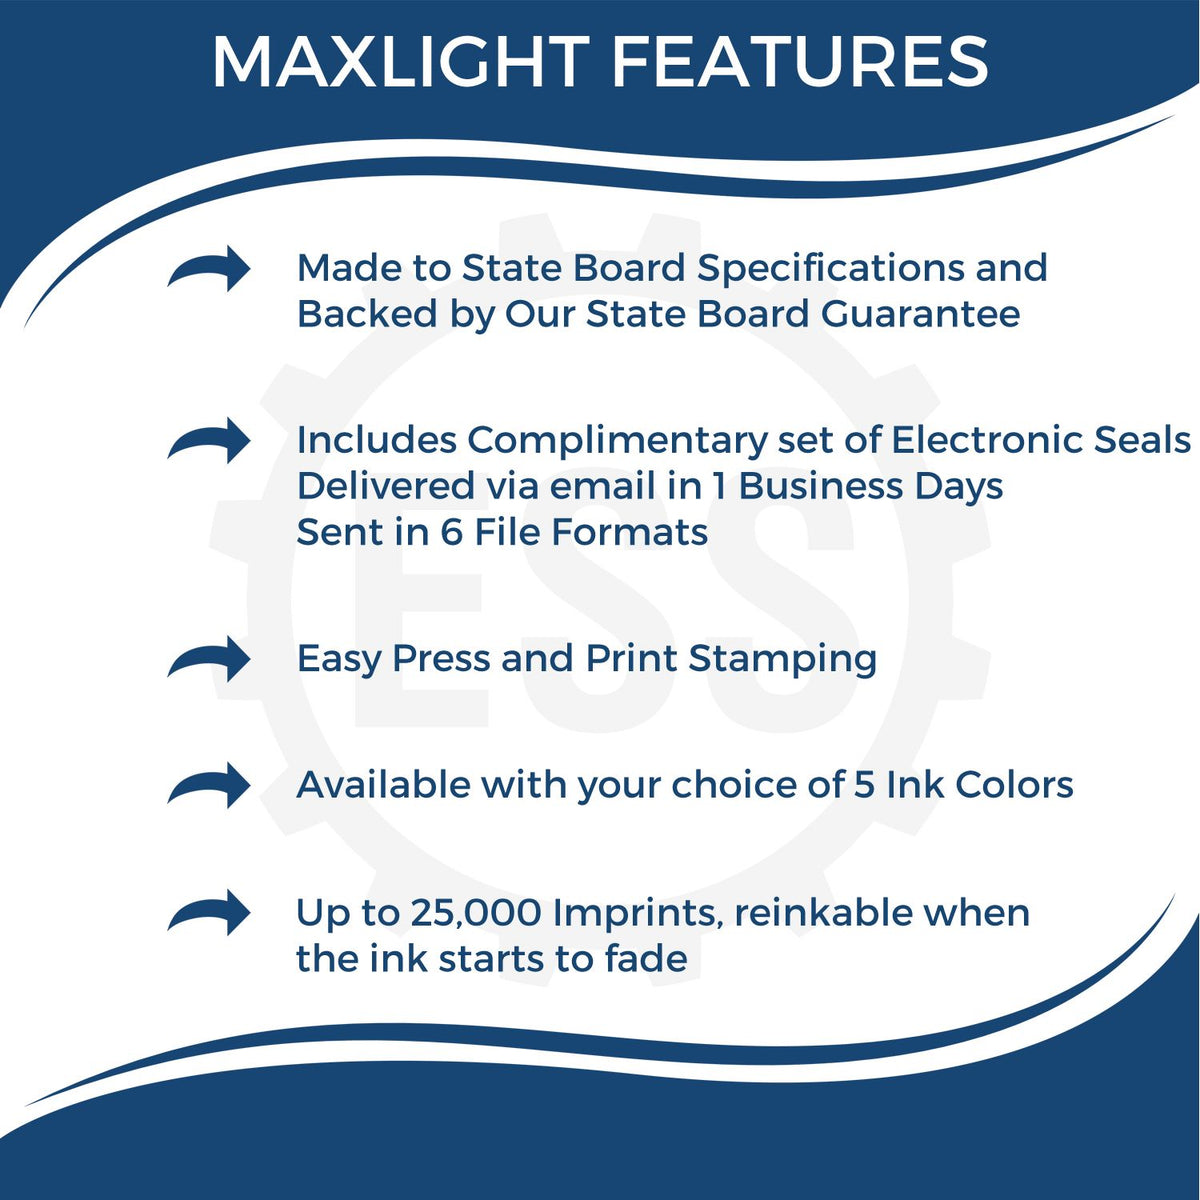 A picture of an infographic highlighting the selling points for the Premium MaxLight Pre-Inked Kentucky Geology Stamp